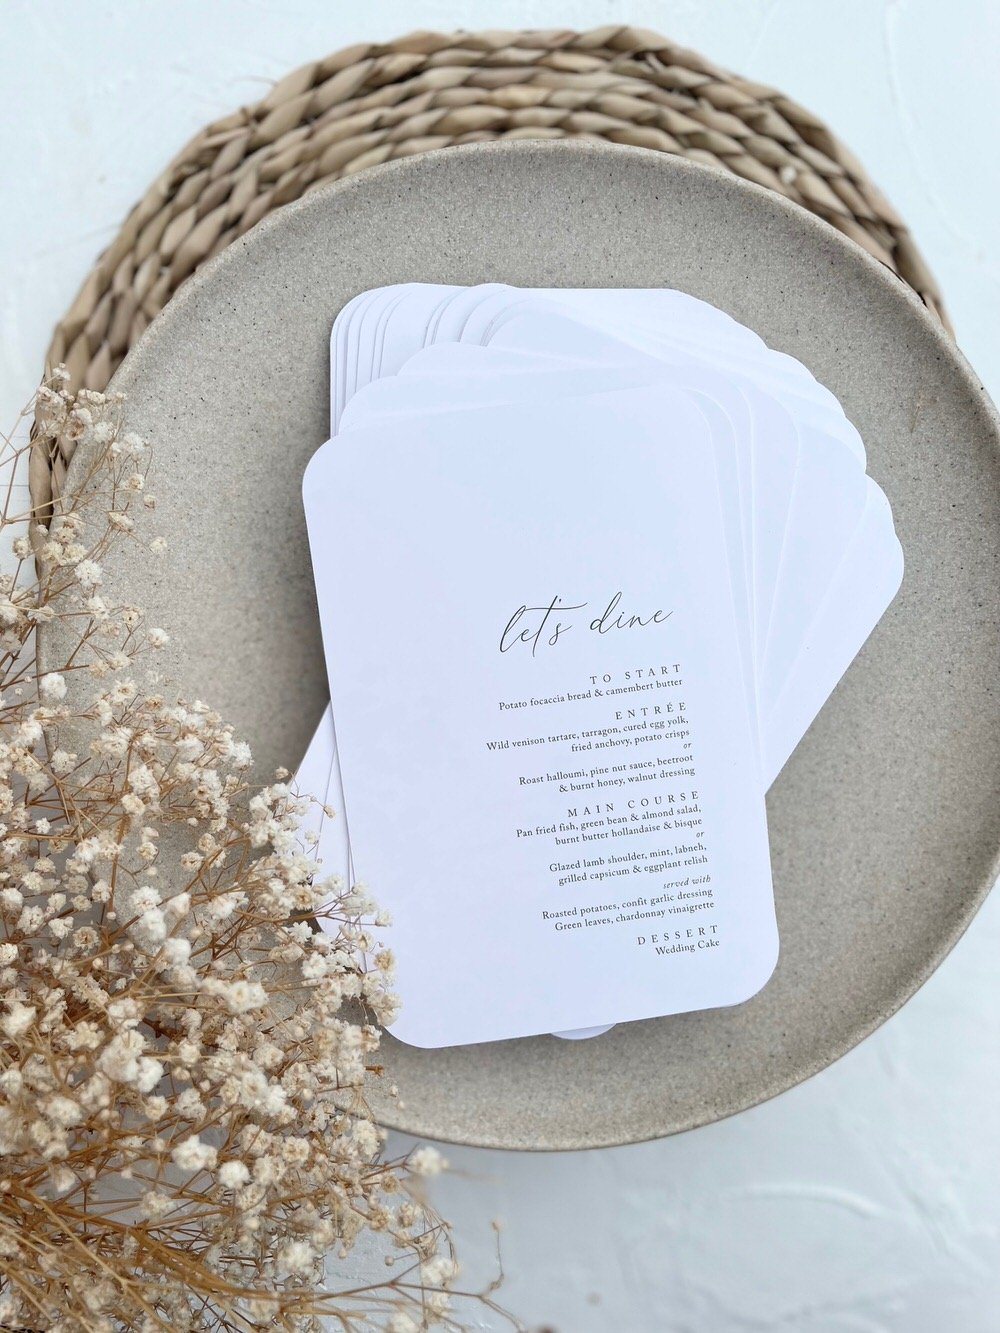 Just My Type Wedding Invitation Stationery NZ Wedding Menu Place Name Table Number3274.jpg